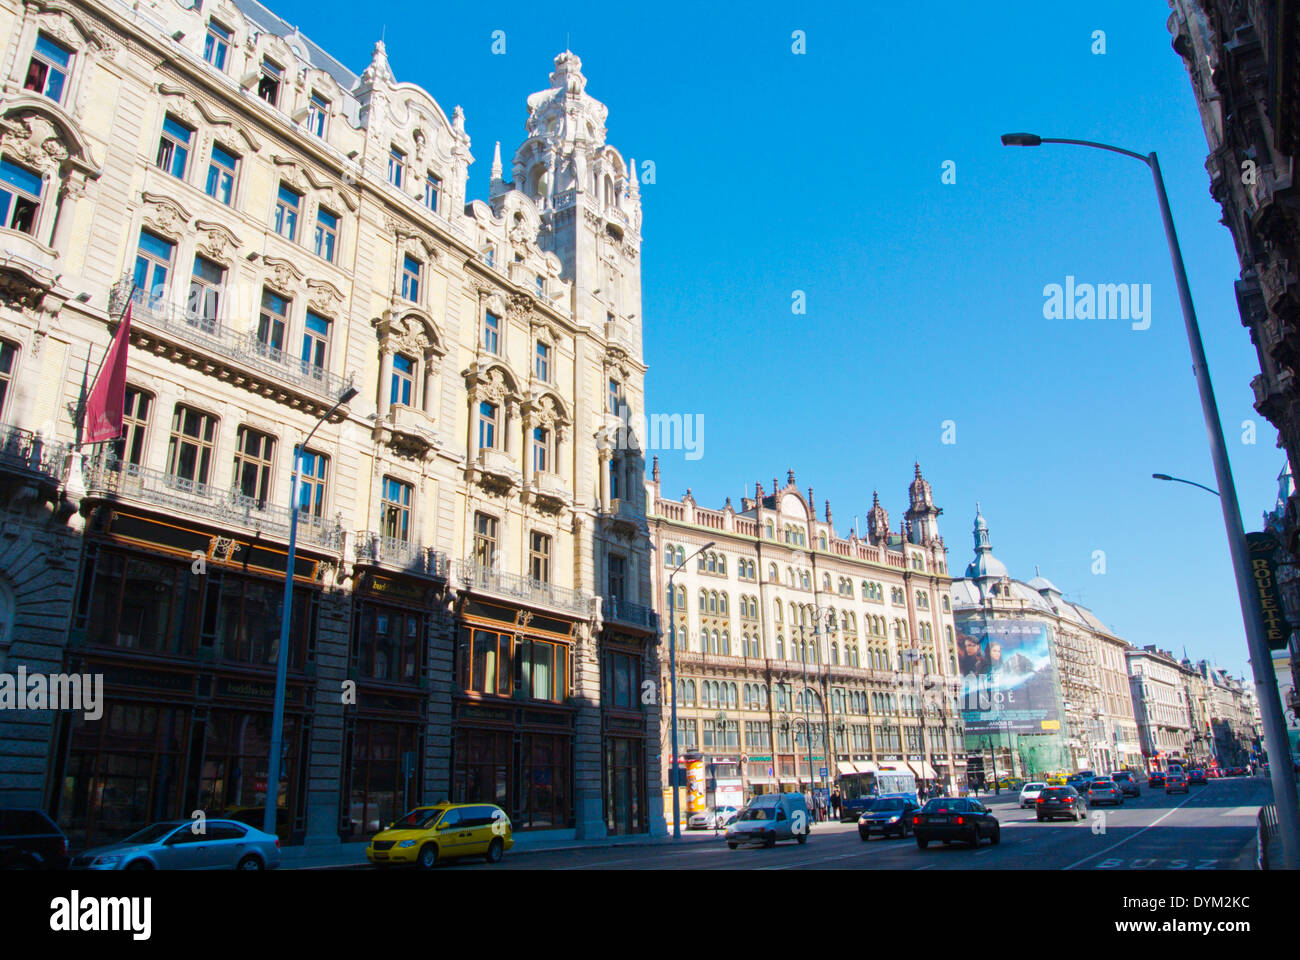 Ferenciek tere square, with Klotild and Brudern palaces, central Budapest, Hungary, Europe Stock Photo